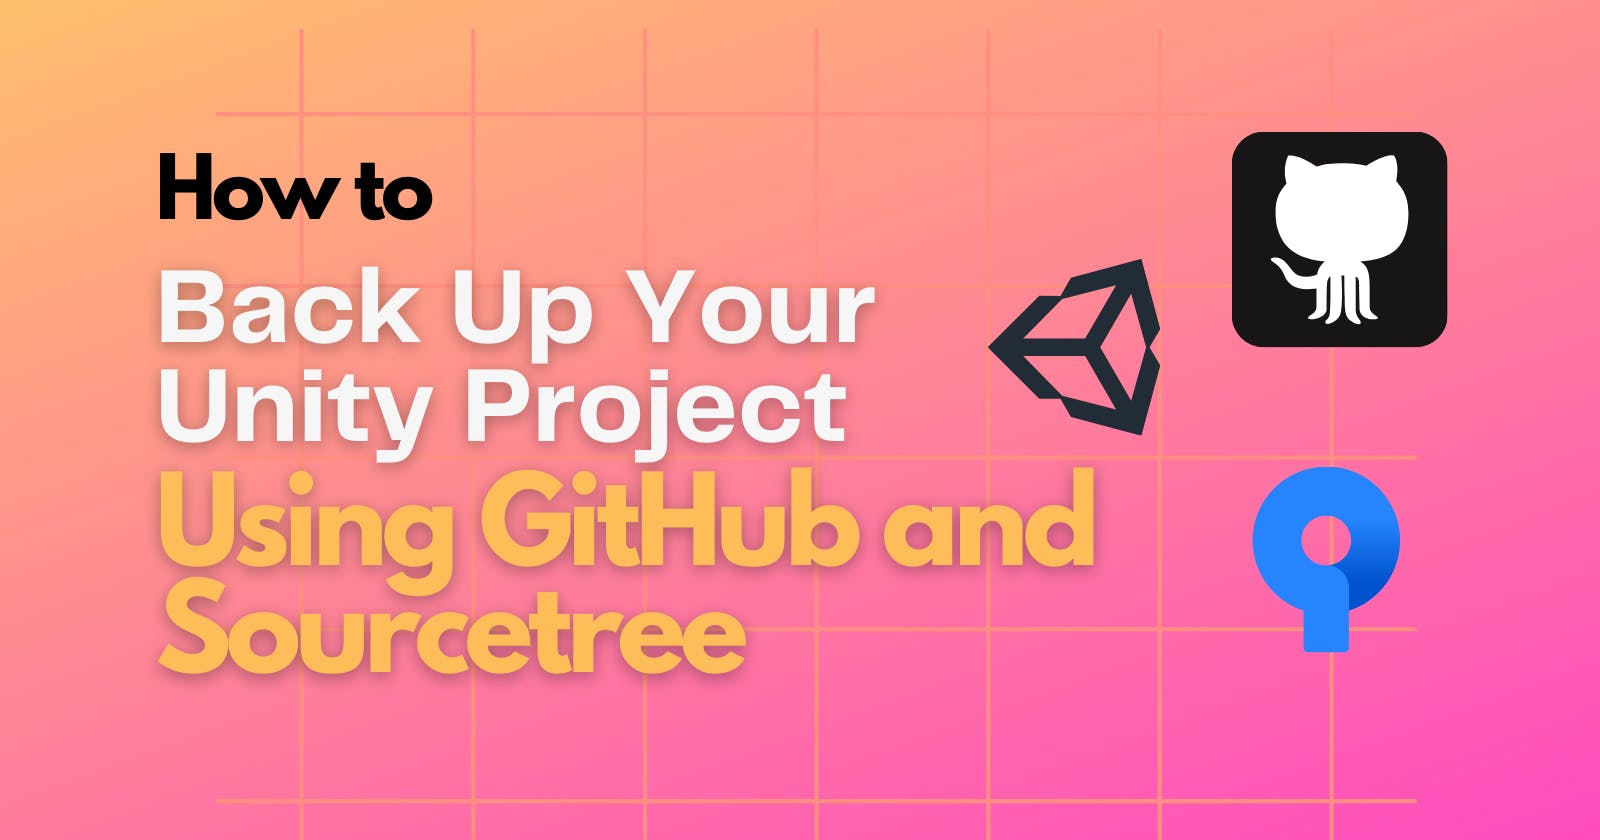 Backing Up Your Unity Project with Sourcetree and GitHub